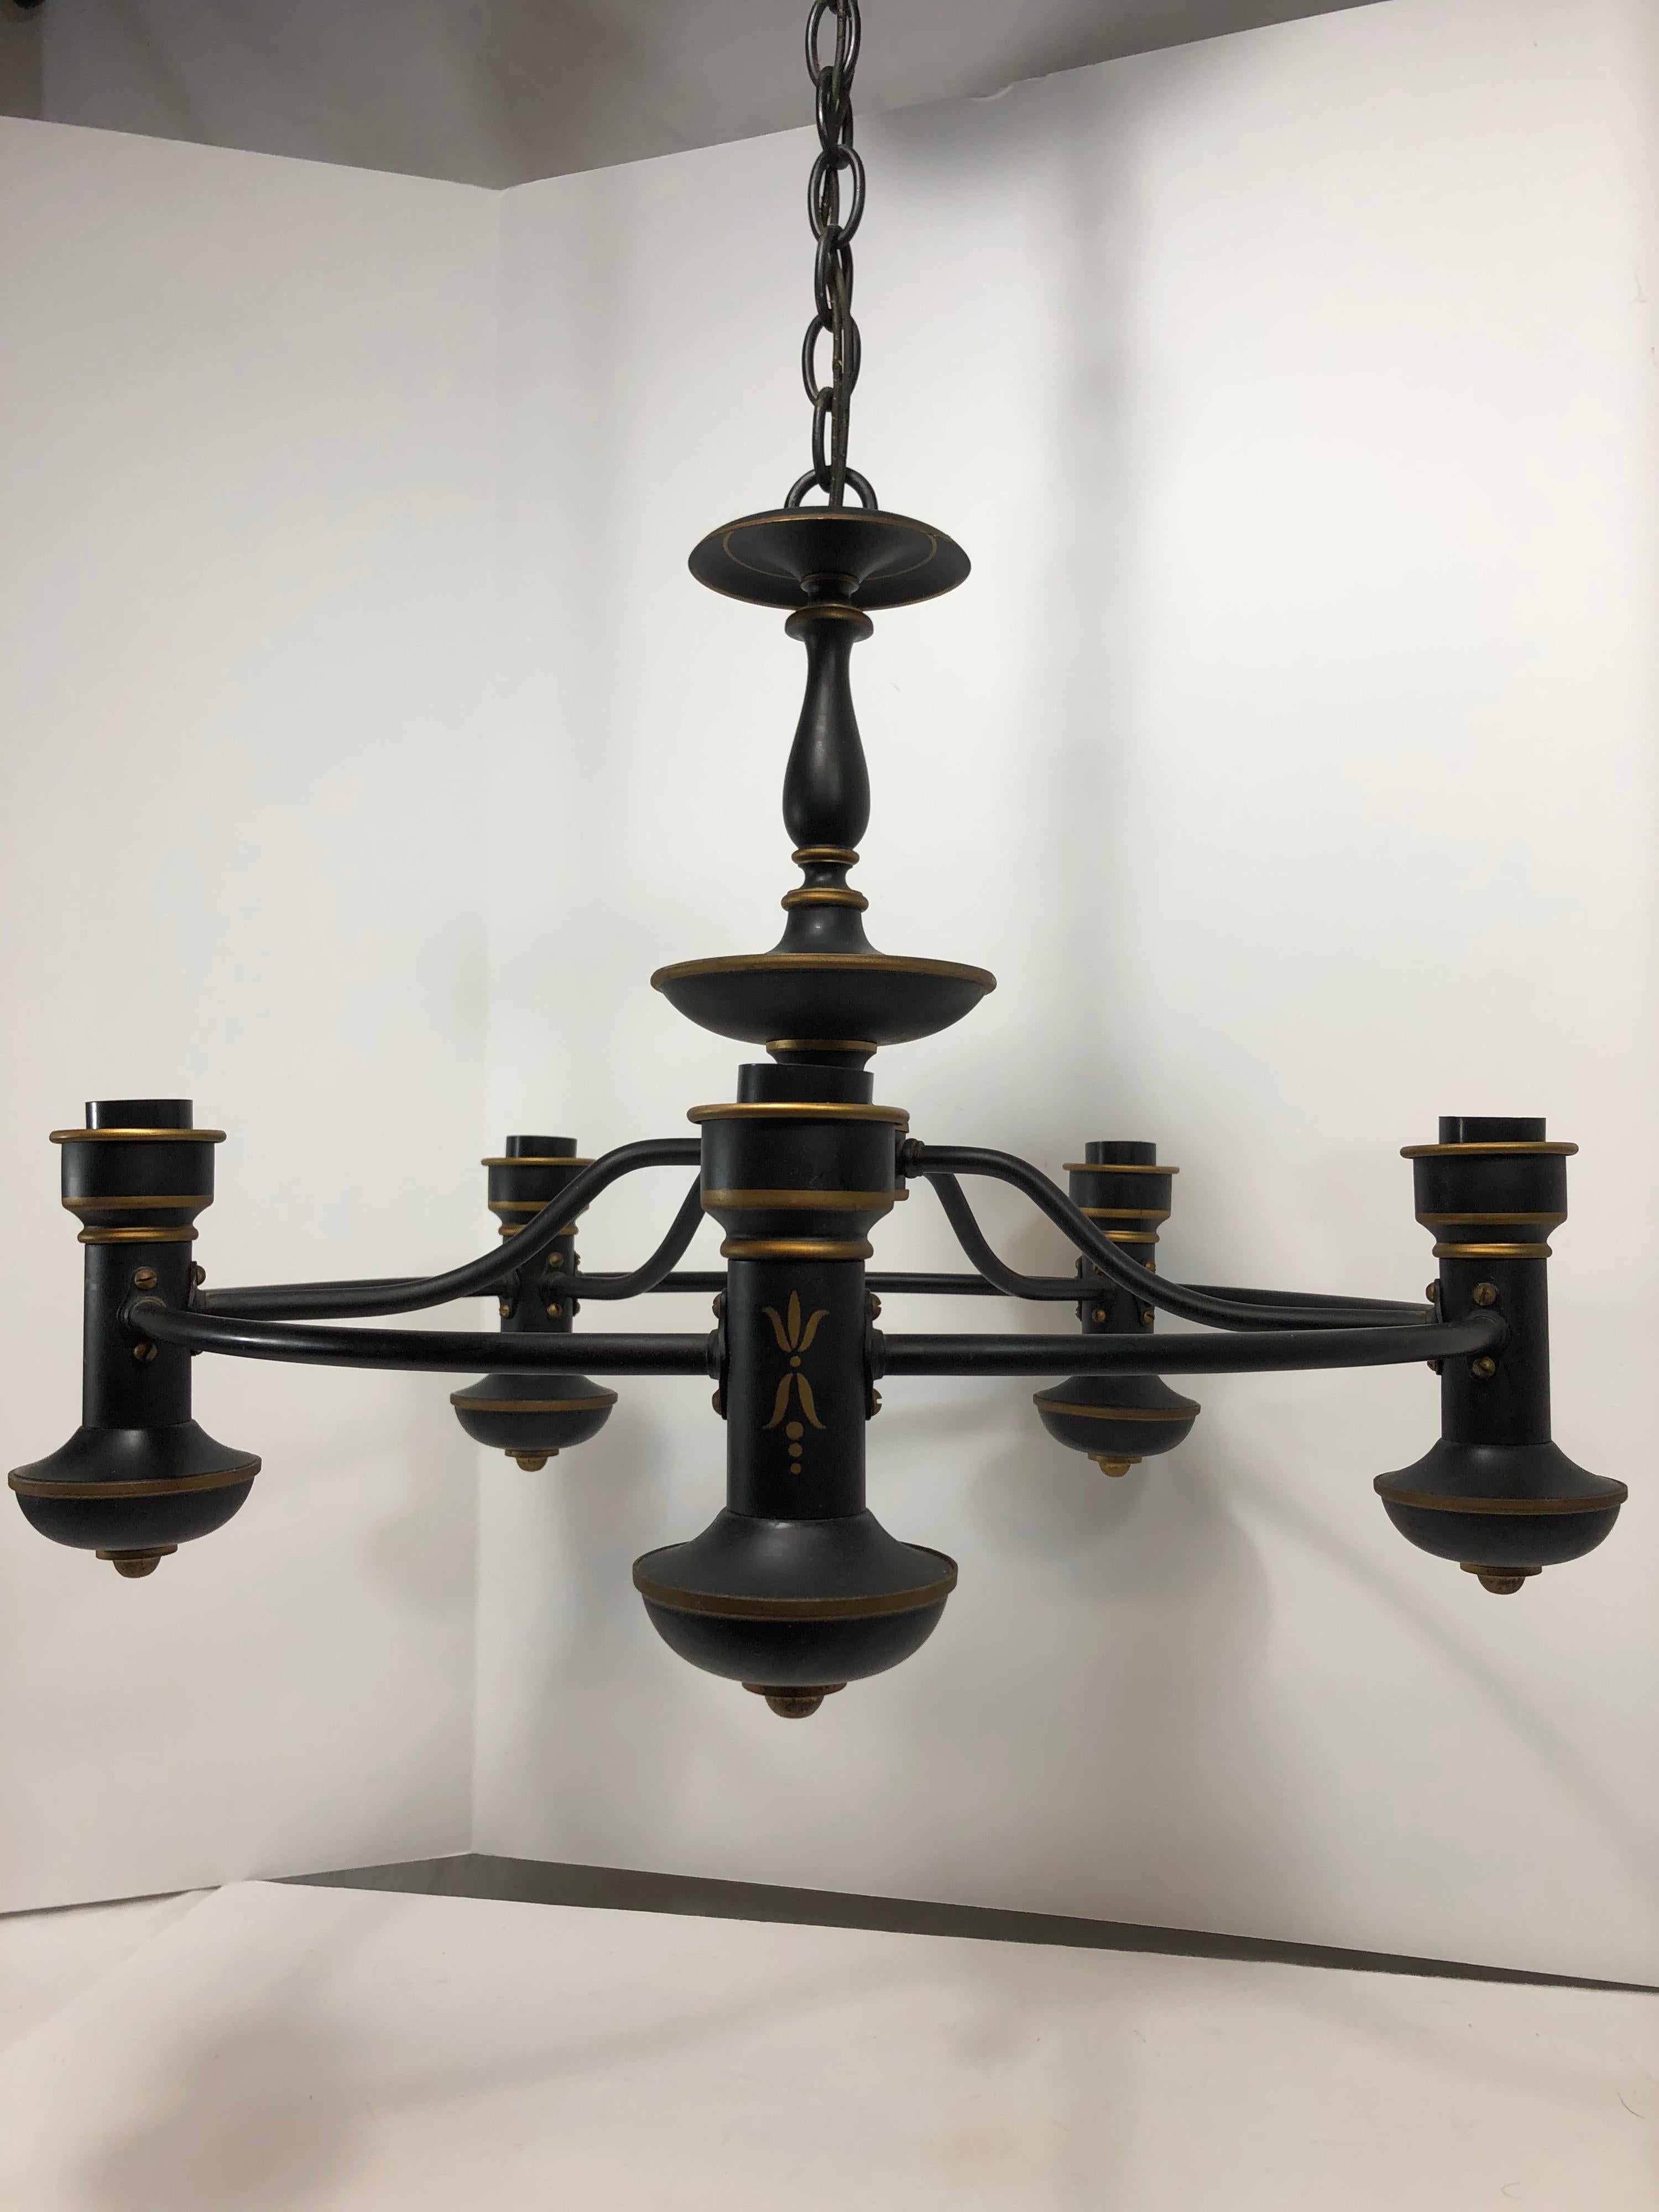 Tole painted metal chandelier in black and gold. Five arms, with original ceiling cap. Working condition.